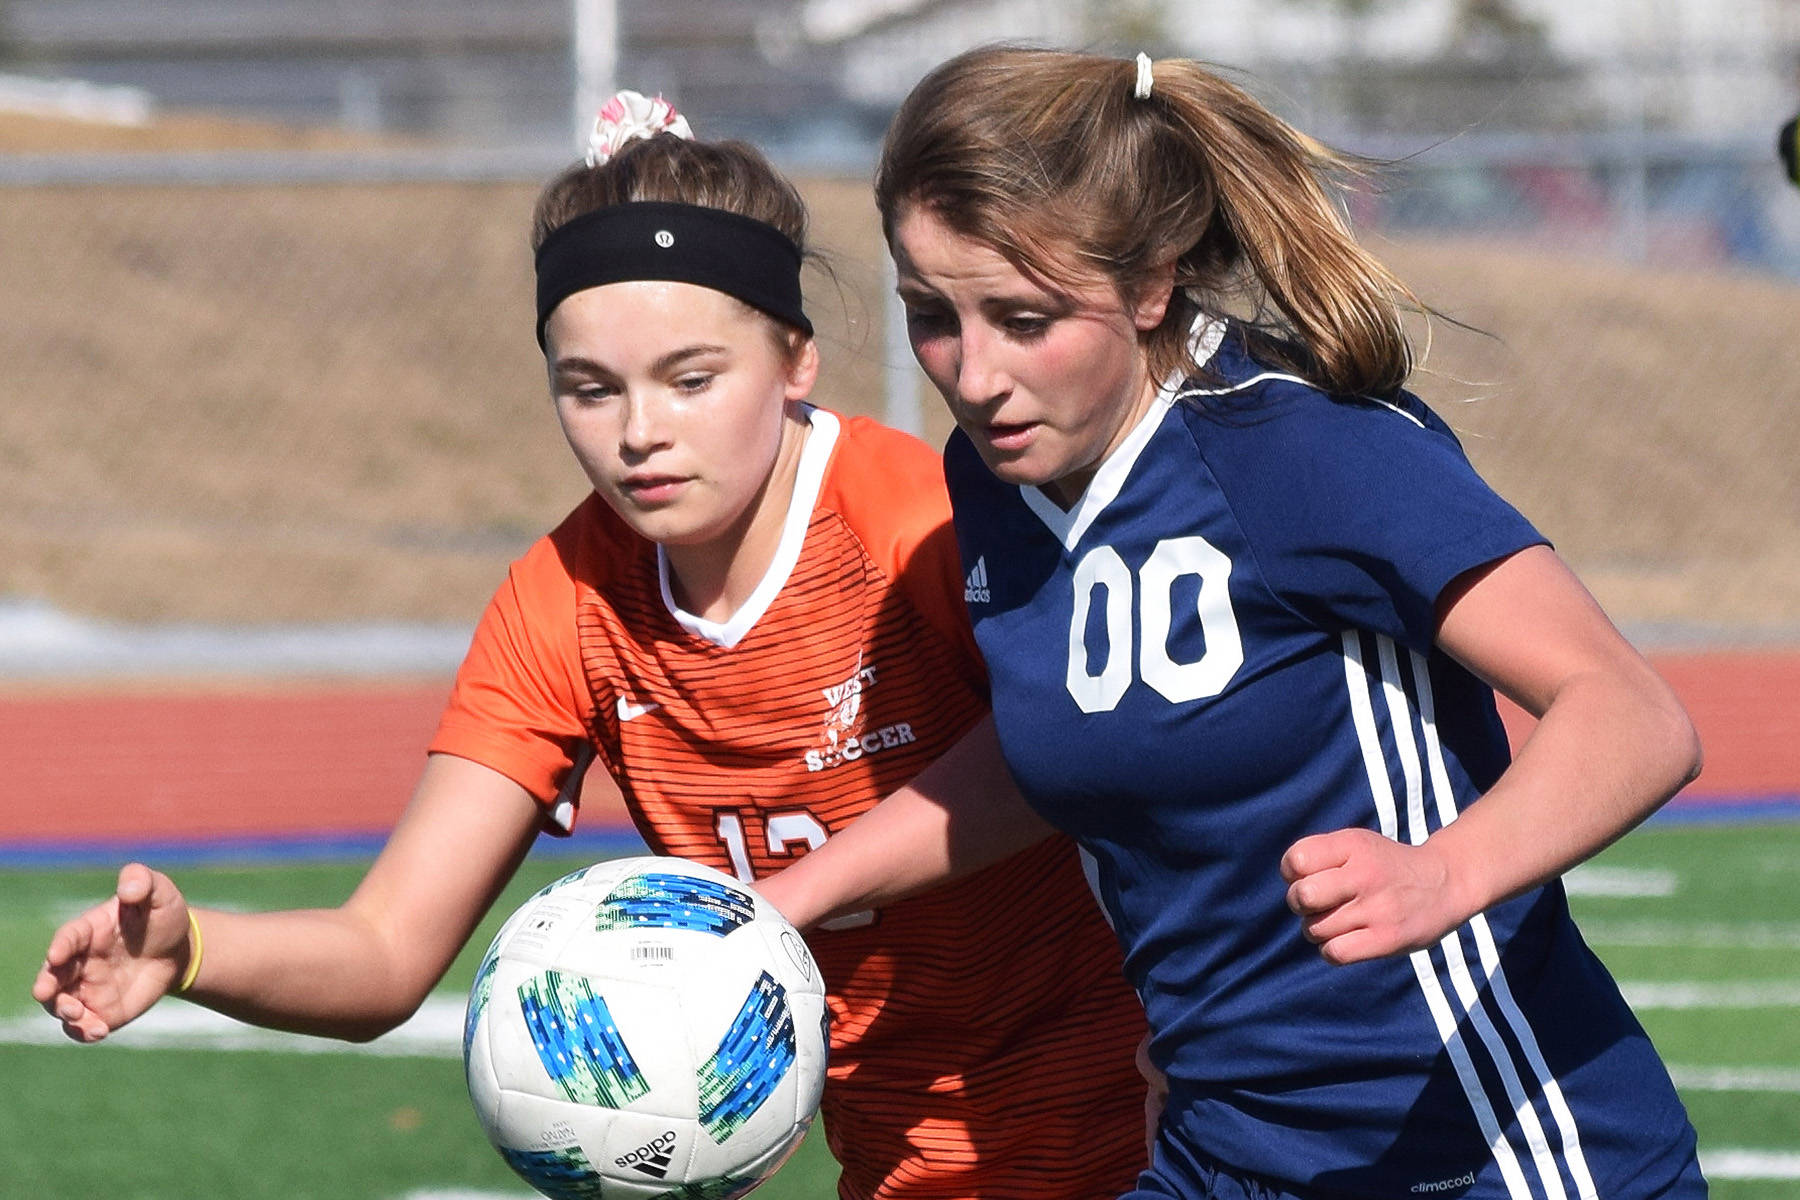 SoHi swept by West in soccer openers